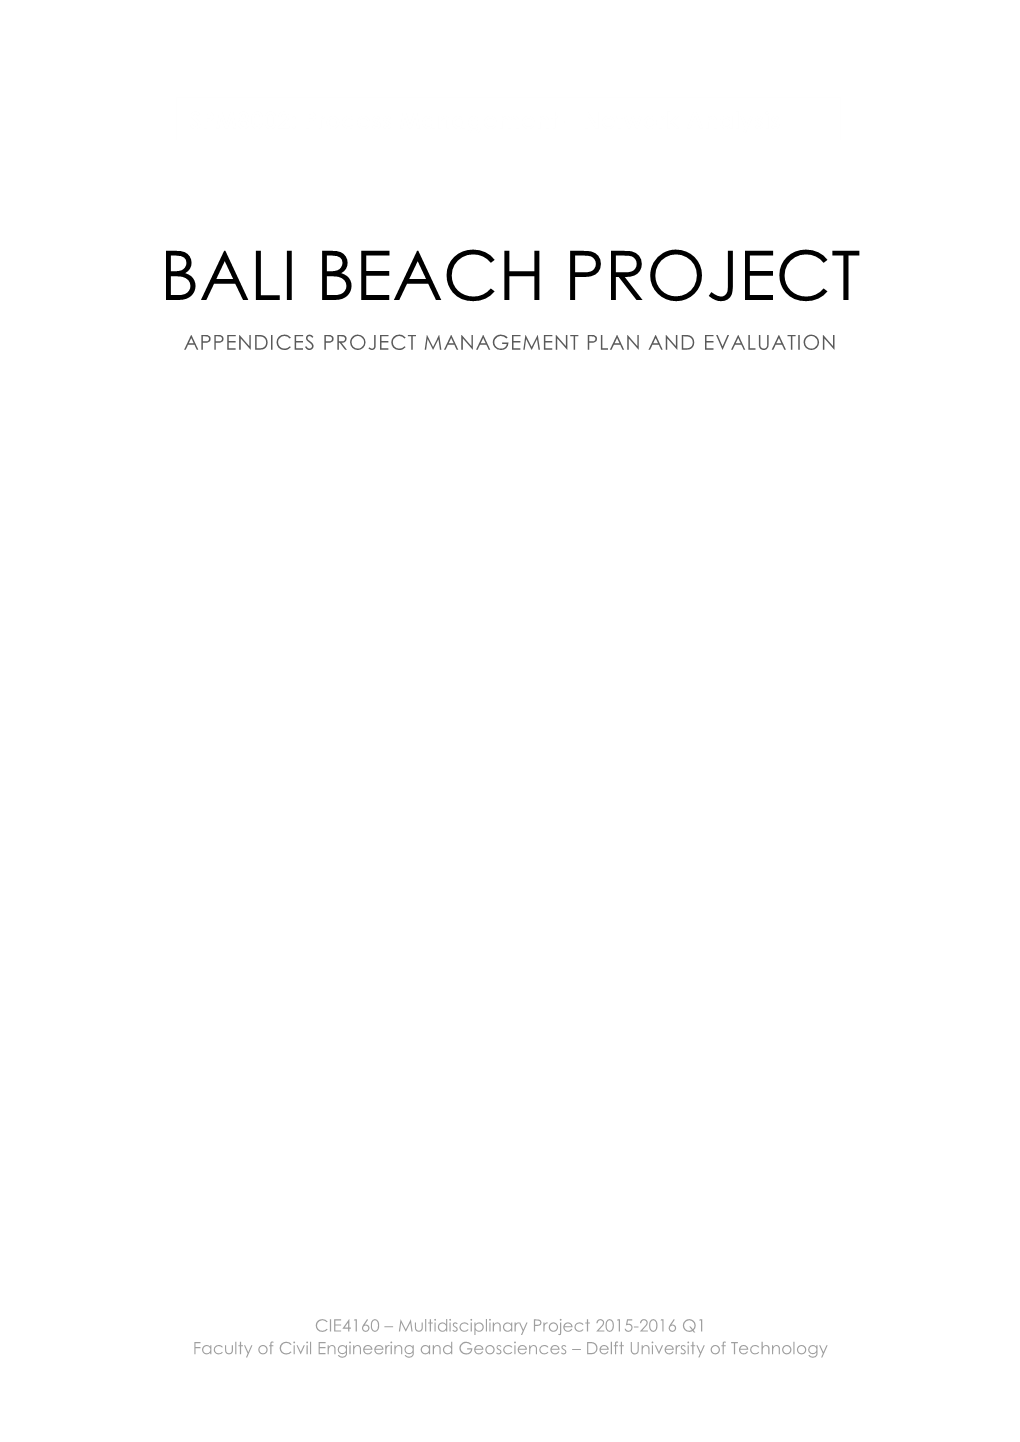 Bali Beach Project Appendices Project Management Plan and Evaluation